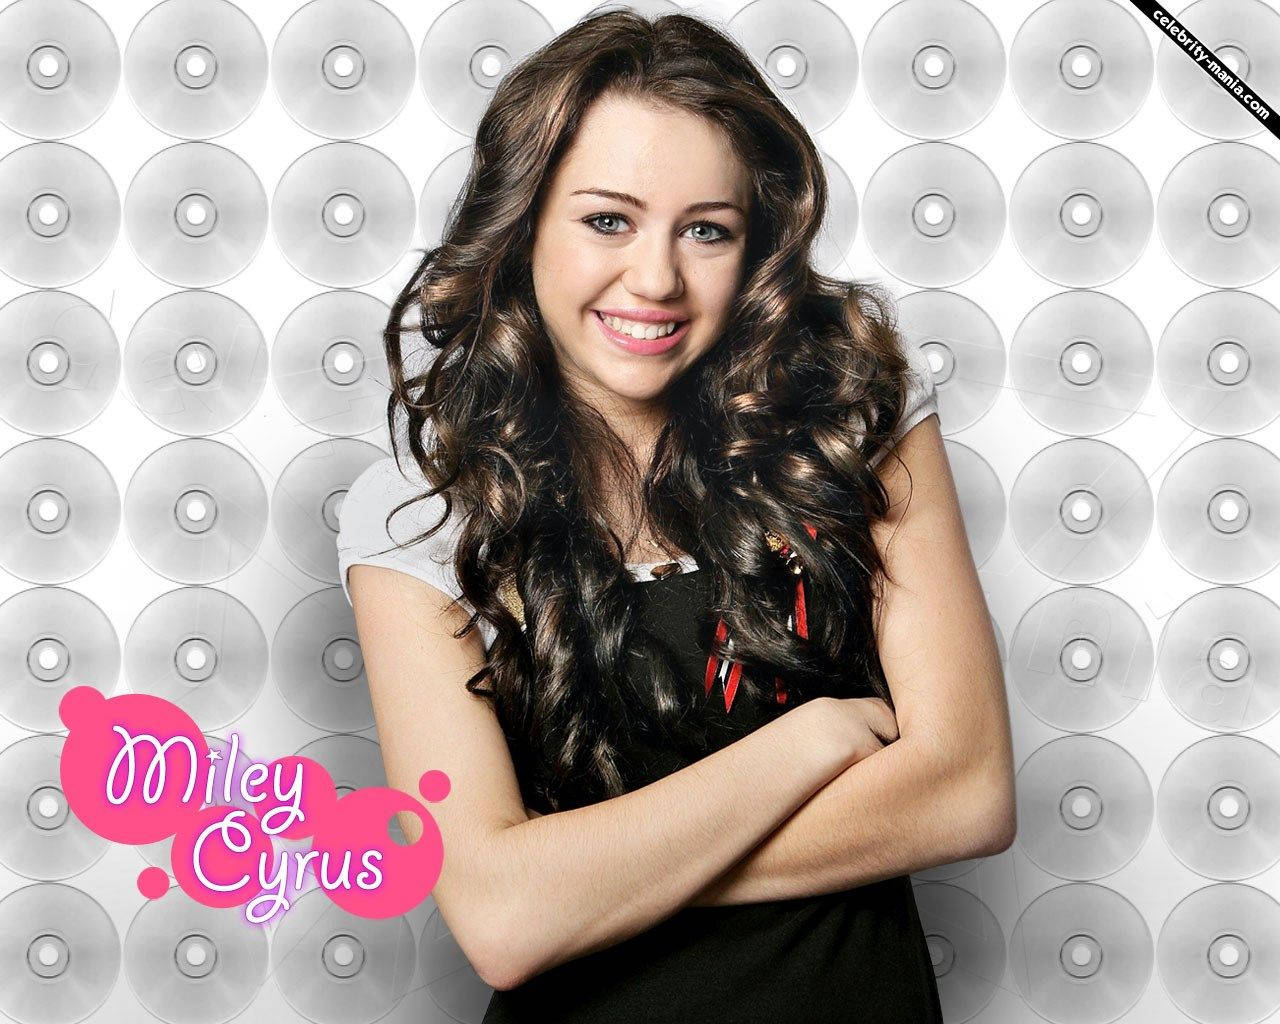 Miley Cyrus With Long Hair Smiling Wallpaper